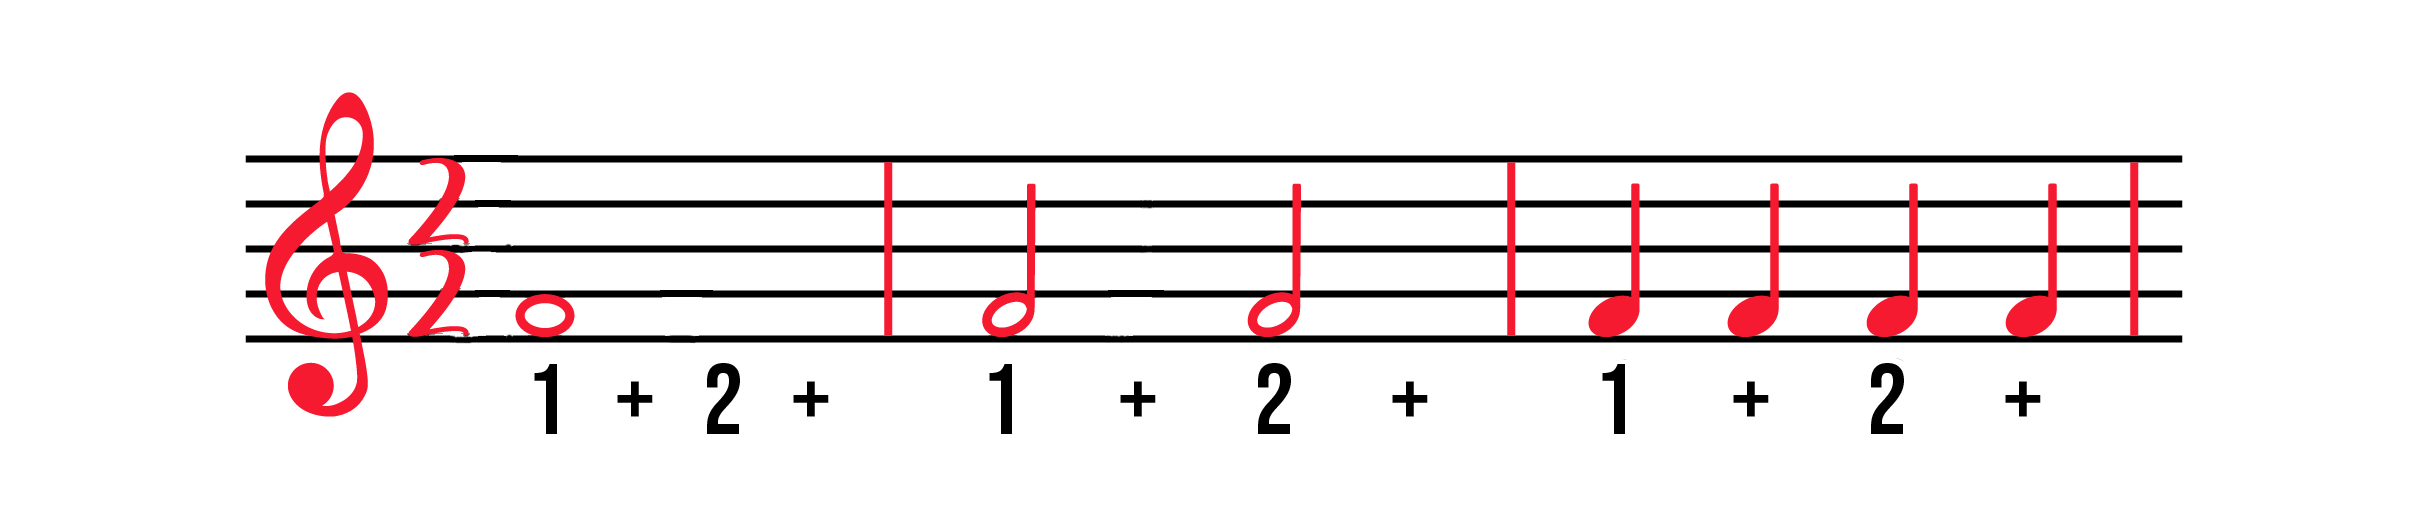 Three measures of notes on treble clef (whole note, 2 half notes, 4 quarter notes) with 2/2 time signature in the front with beats labelled 1+2+.